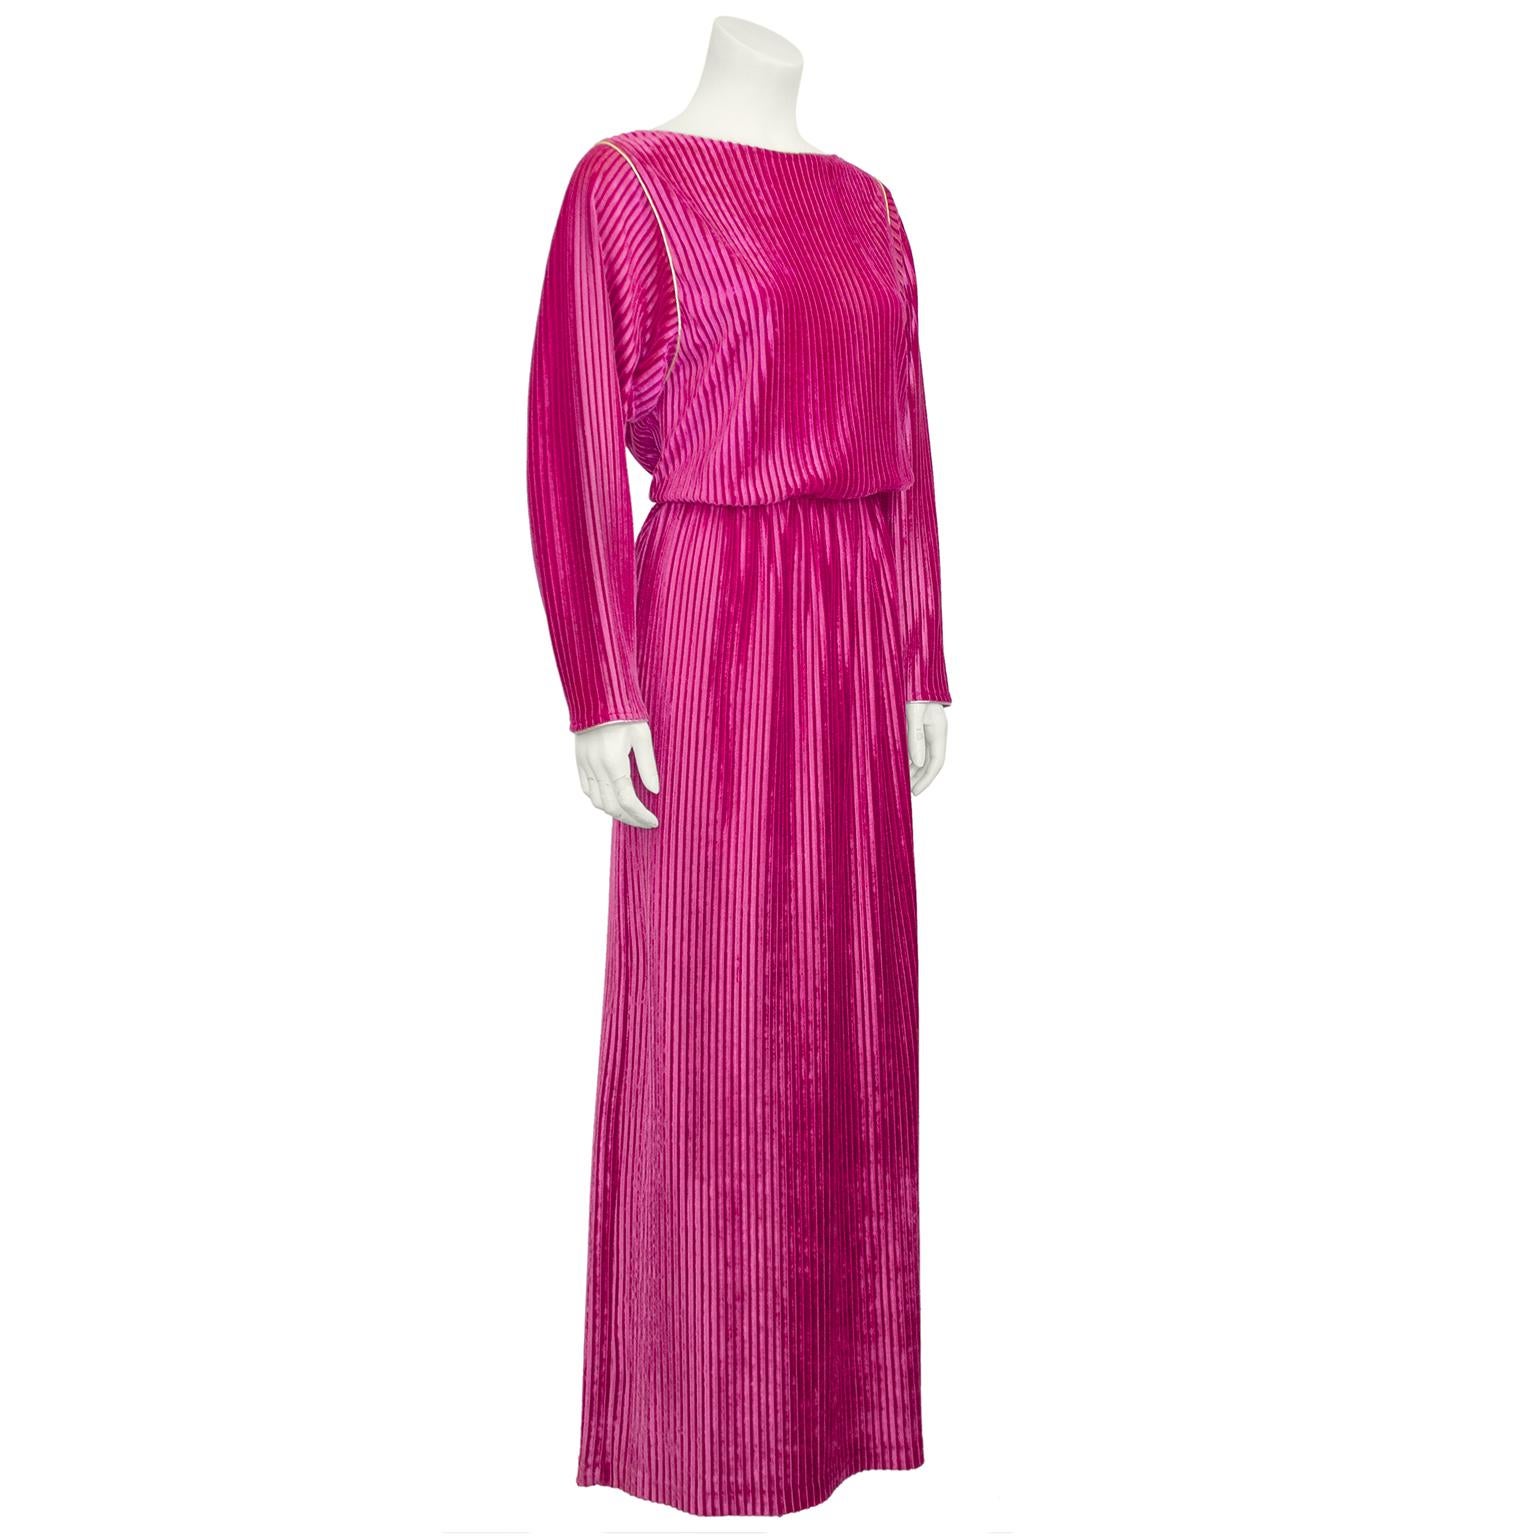 Elegant 1980's Bill Tice hostess gown. Mr Tice was best known for designing dresses and pajamas that could be worn inside or outside the home. He was part of a small group of designers who put at-home wear into the wardrobes of shoppers by pricing